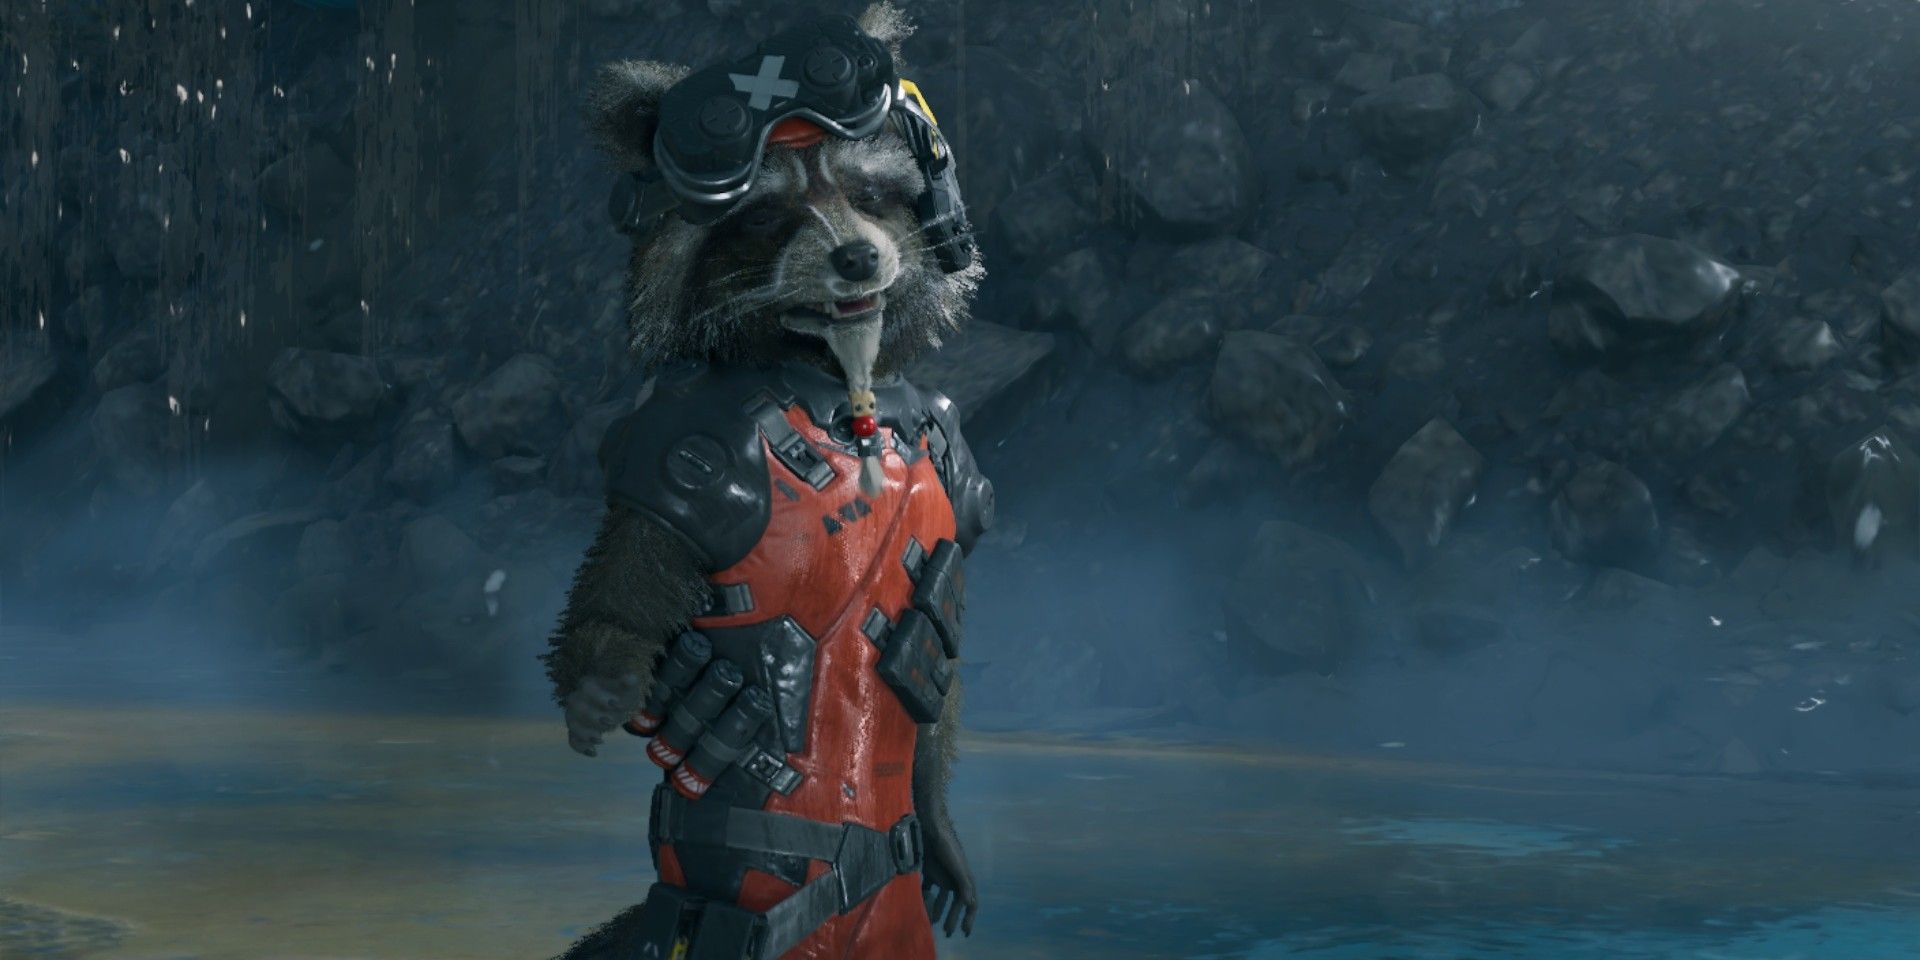 Rocket in Marvel's Guardians of the Galaxy